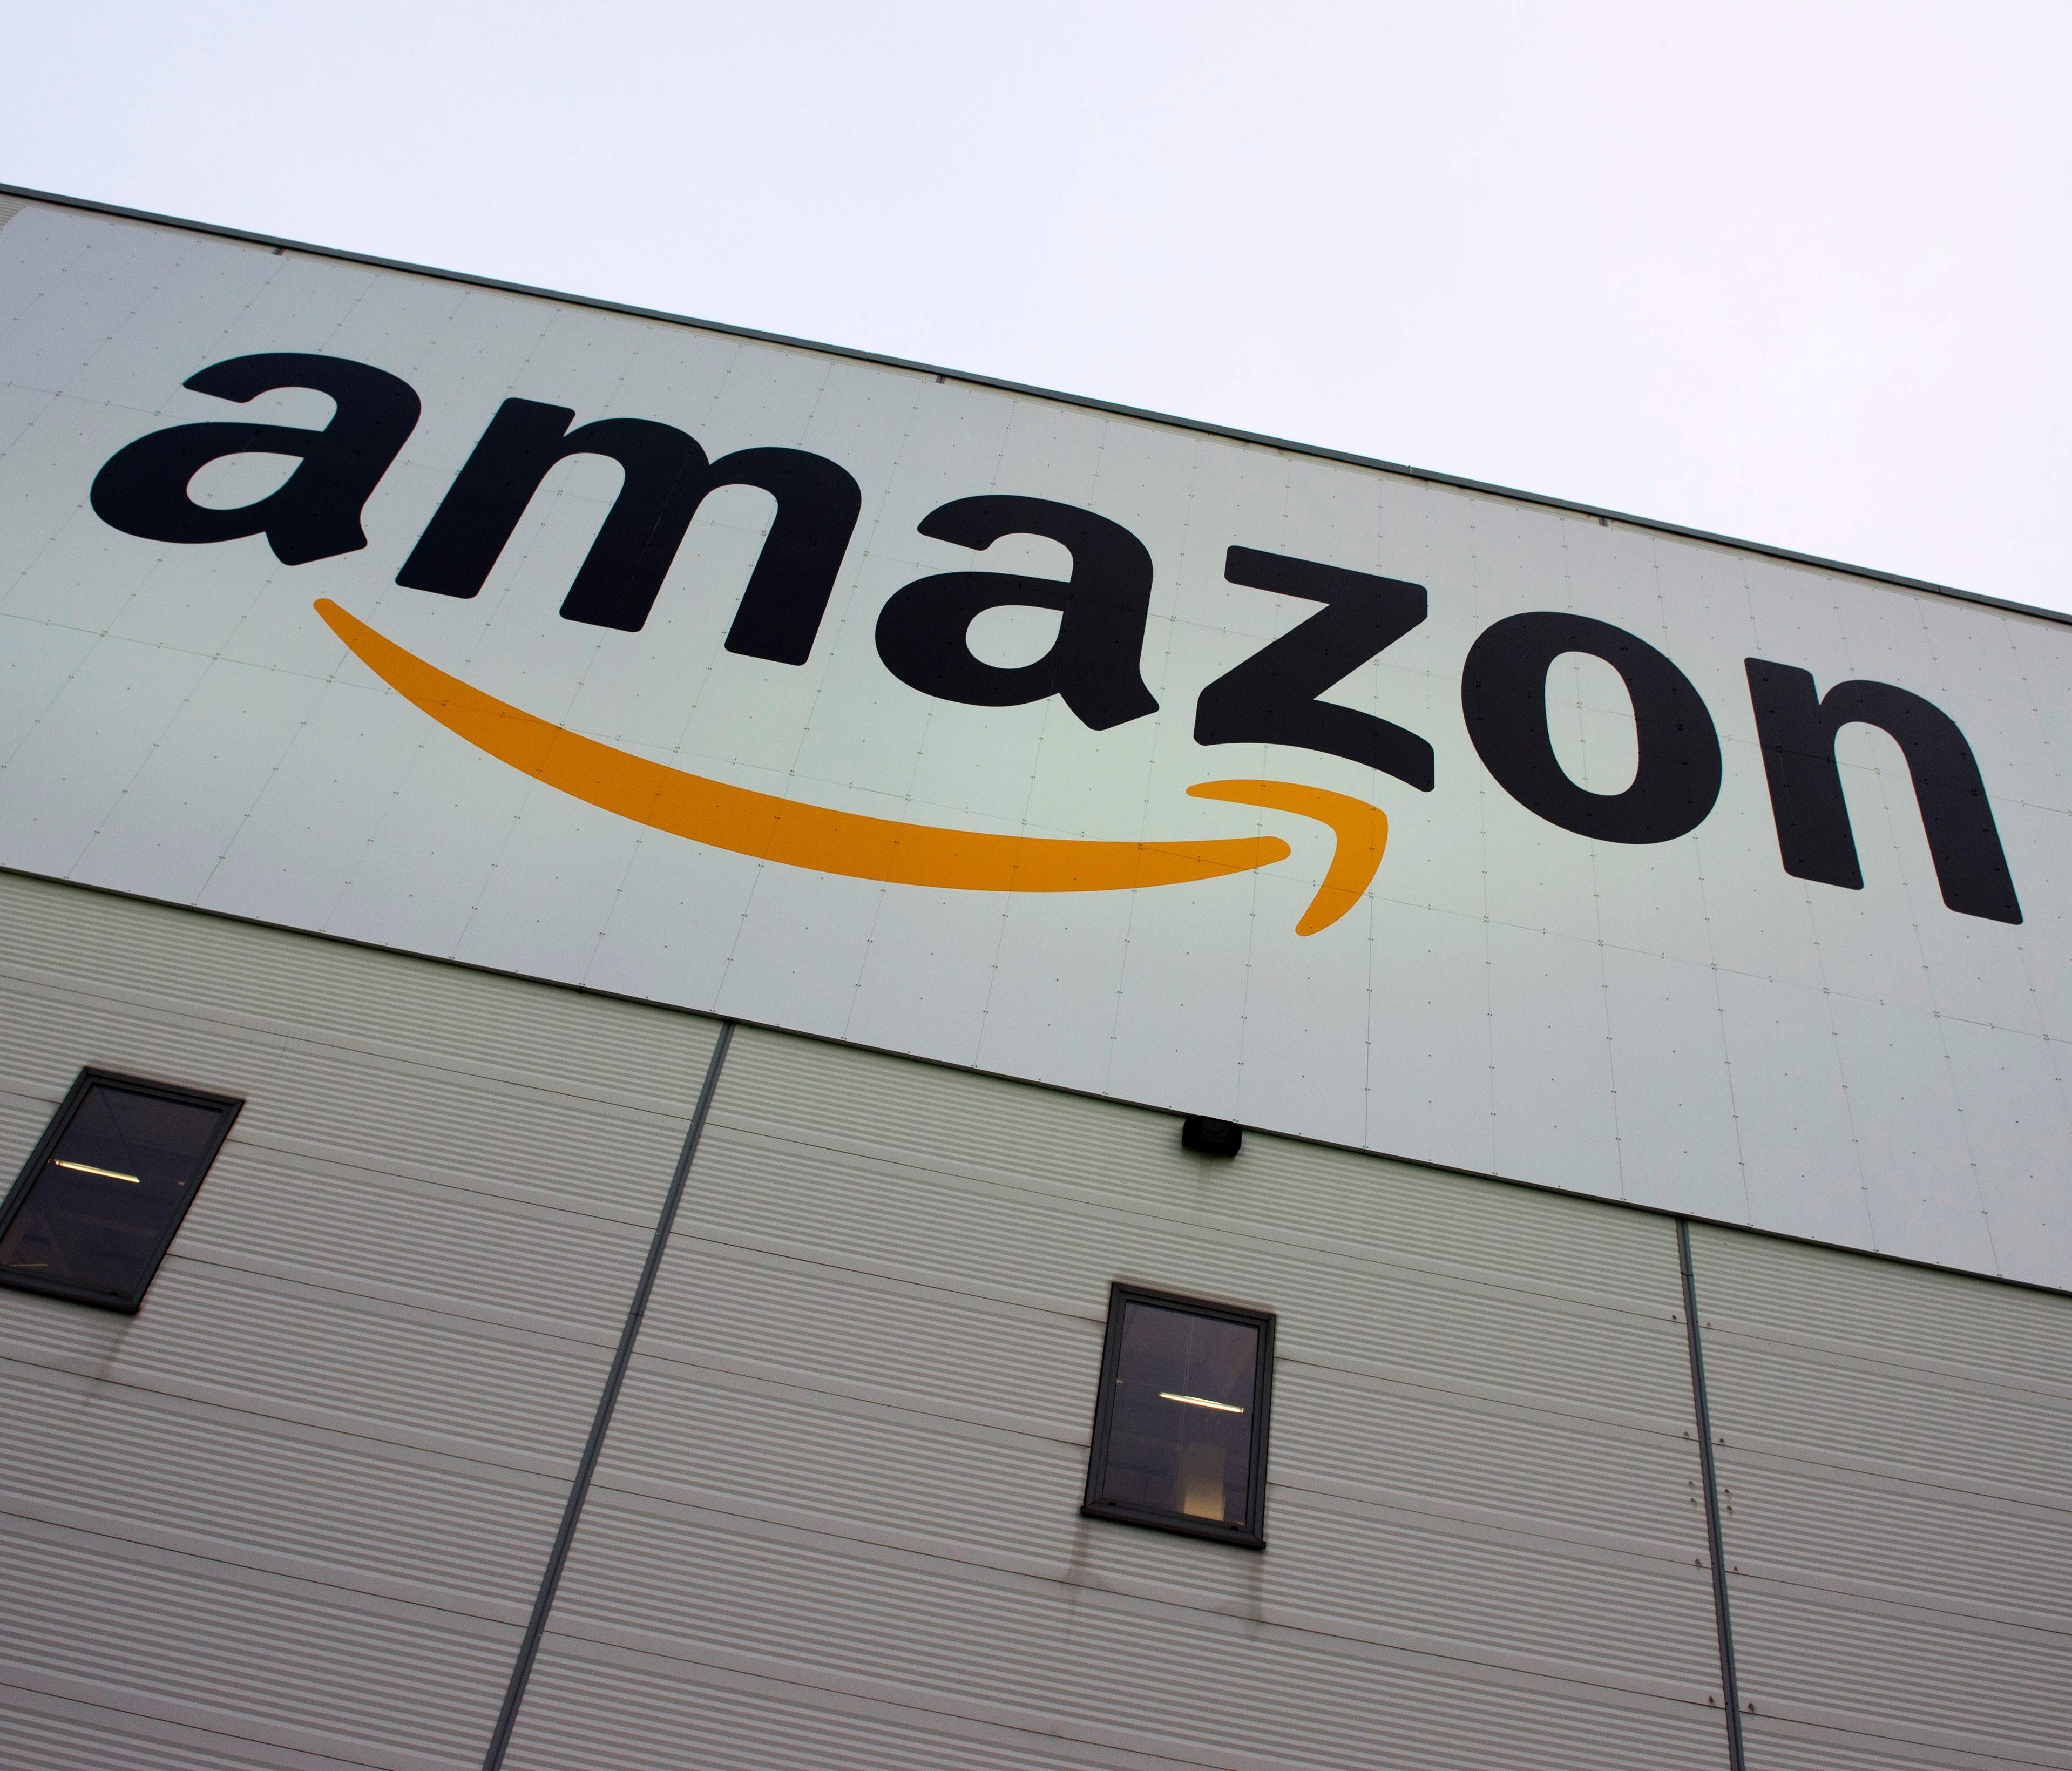 The Amazon logo appears on the company's logistics center in Brieselang, Germany, west of Berlin.